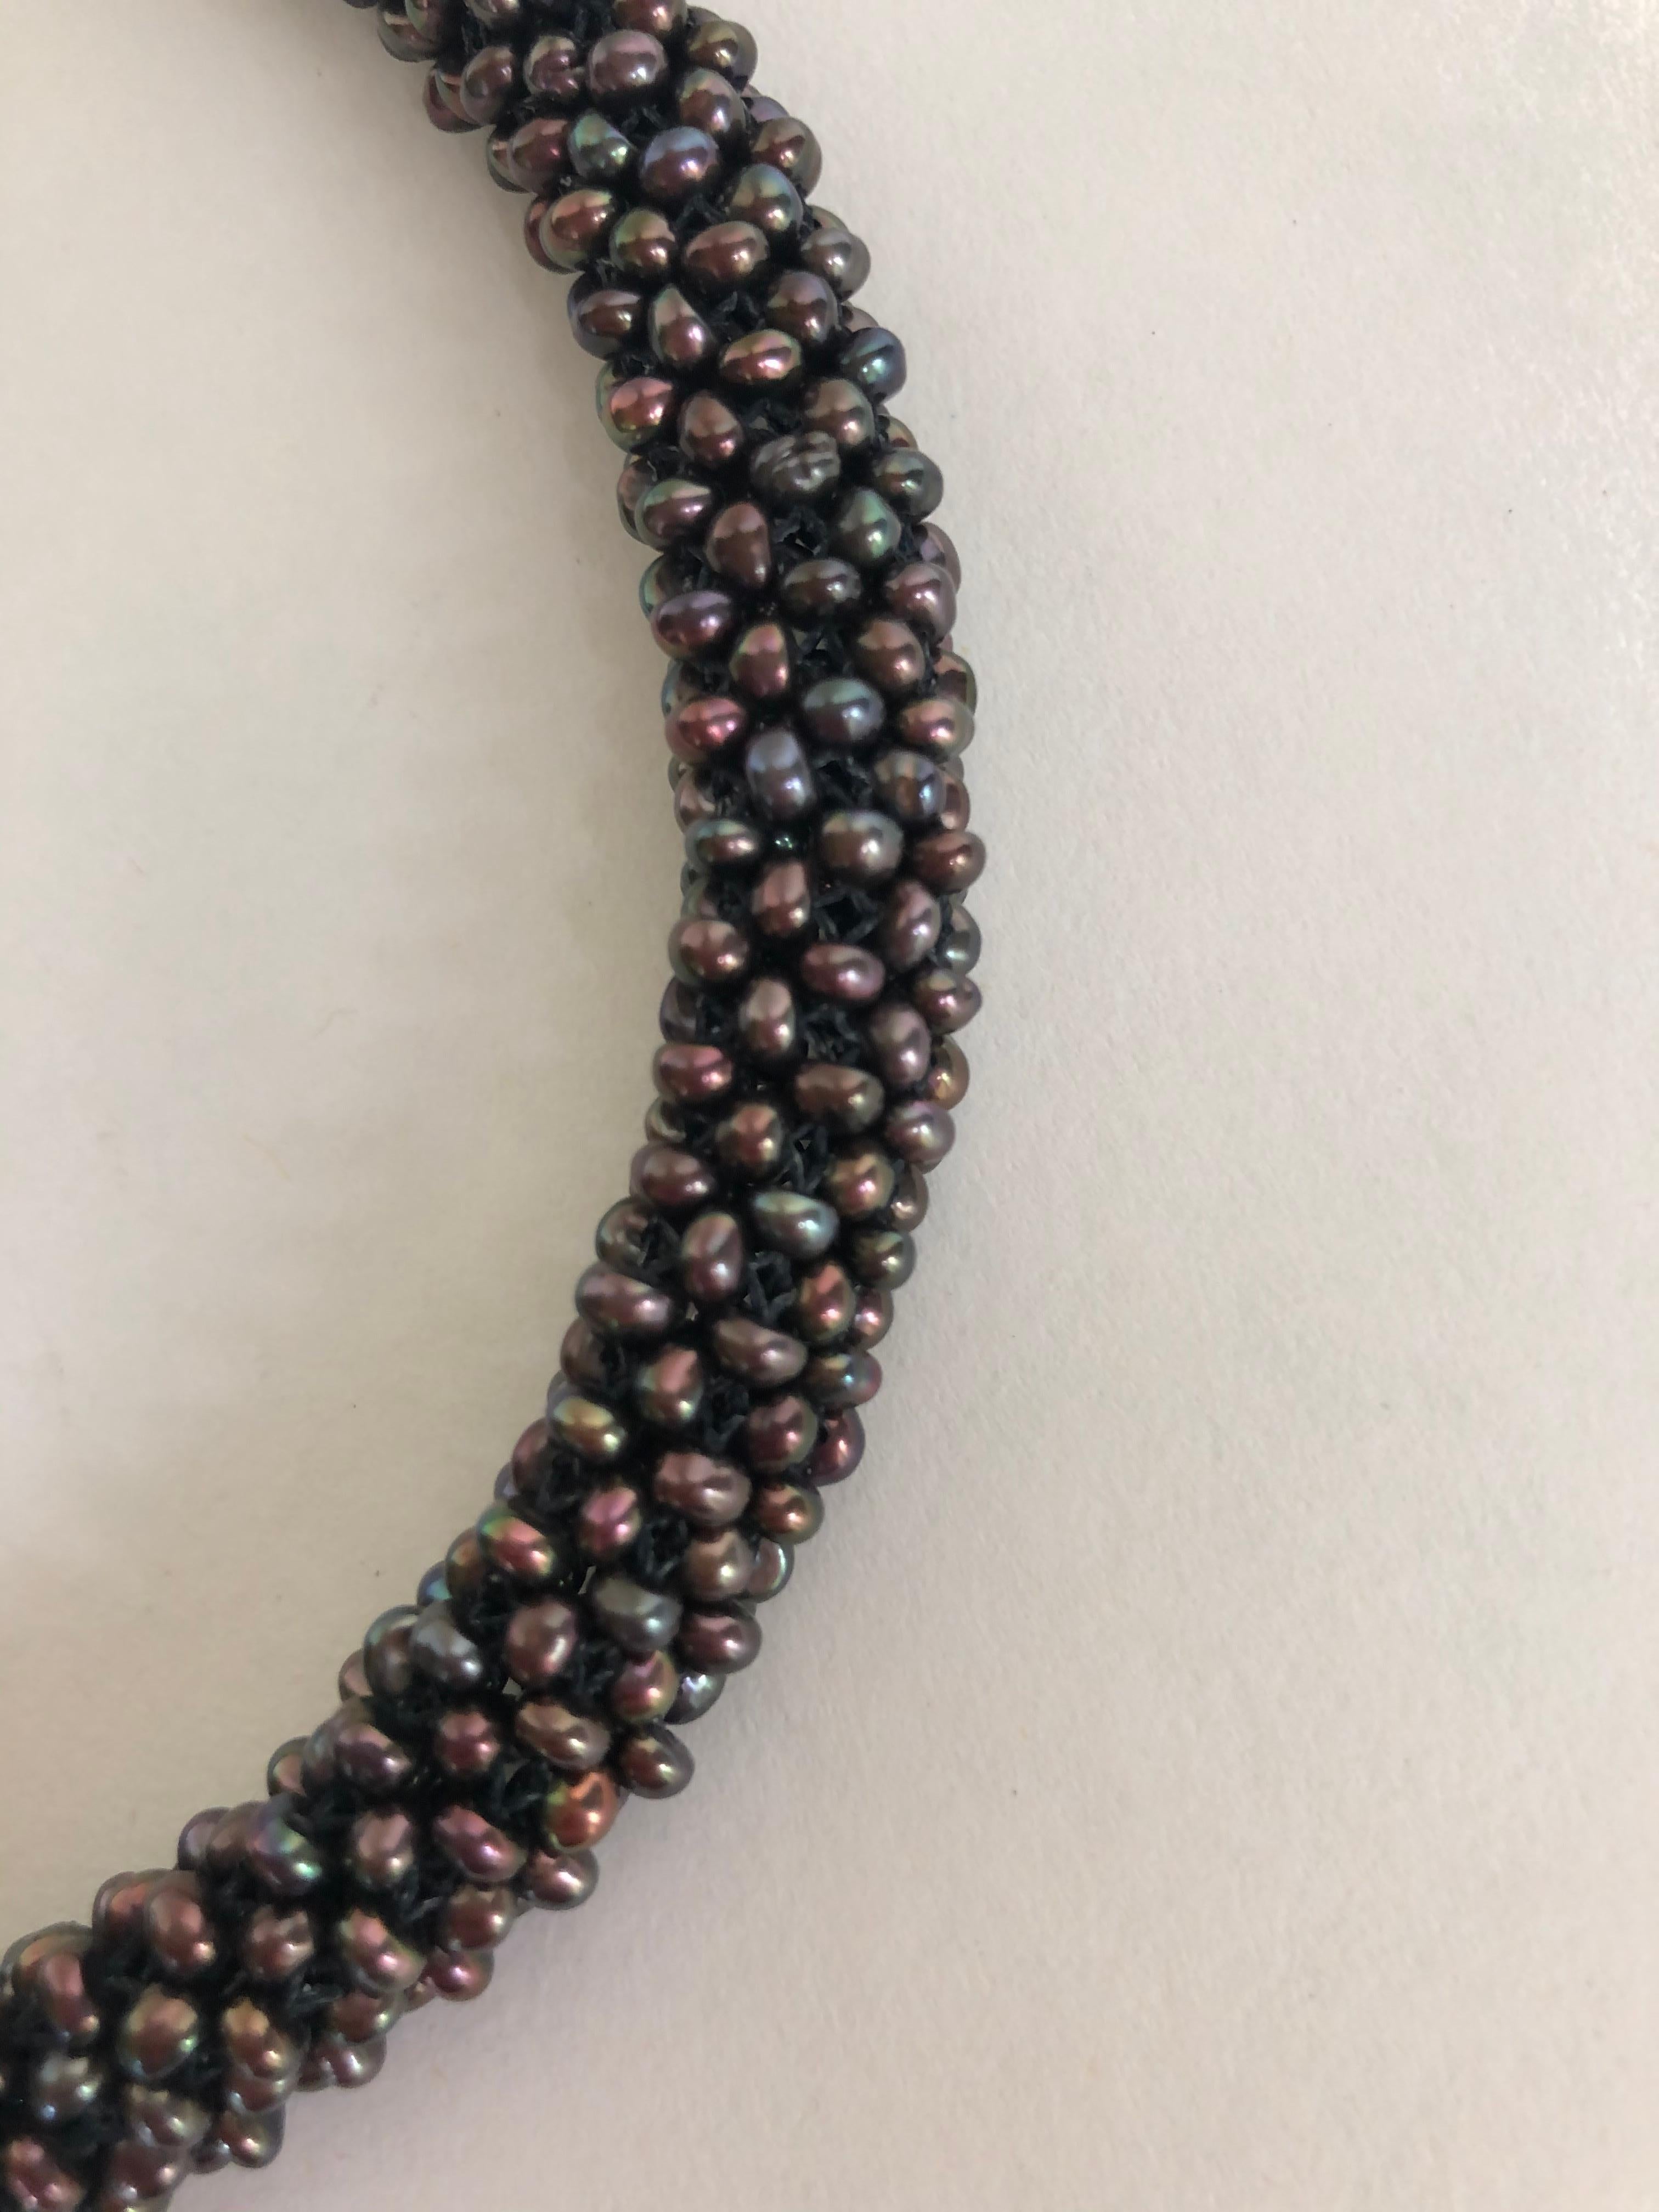 Bead Marina J 3-D (rope like) Unique Black Pearl Necklace with 14 k Yellow Gold Clasp